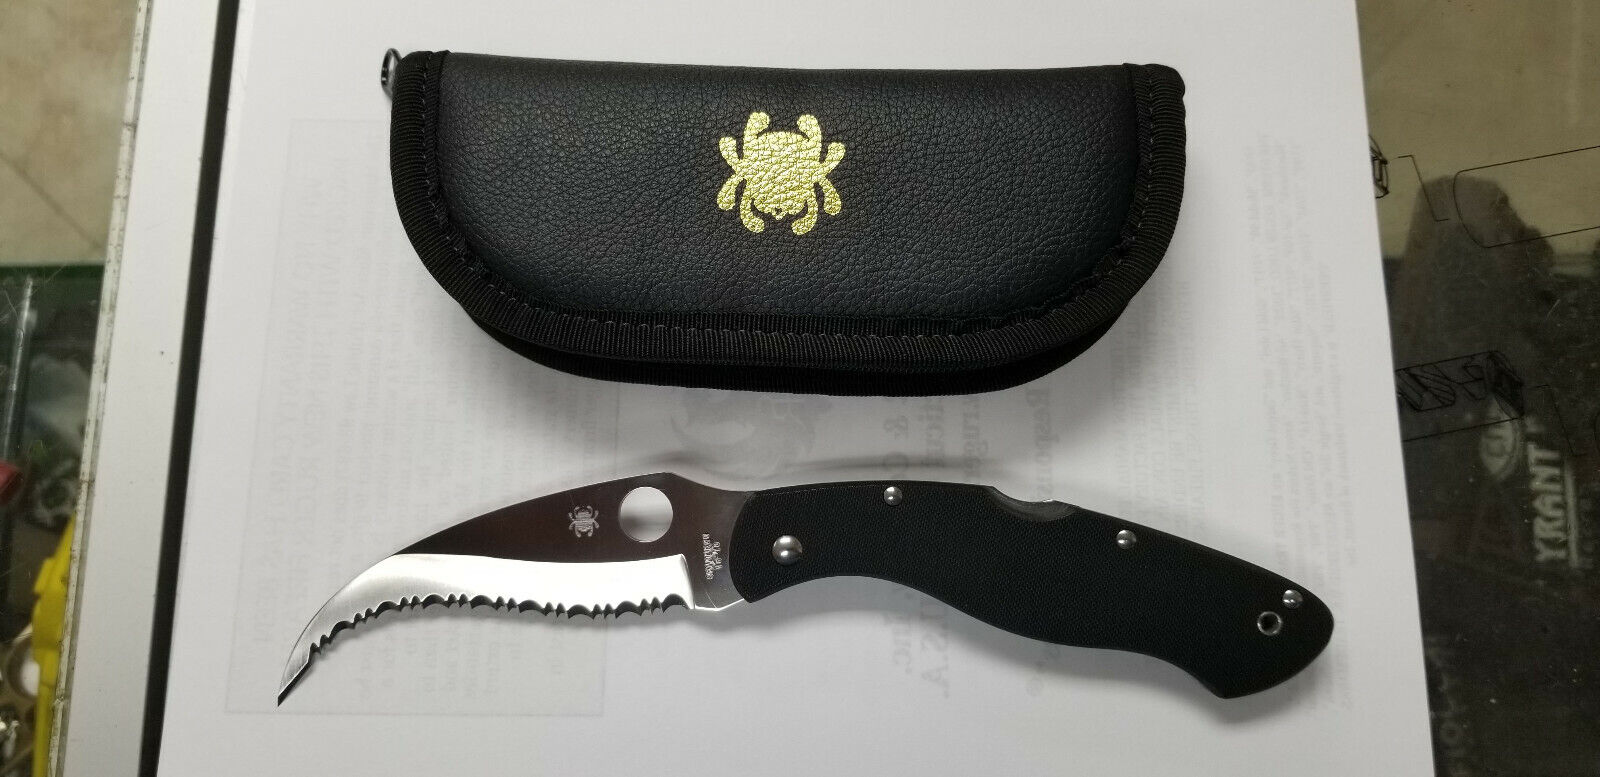 RARE SPYDERCO CIVILIAN - SpyderEdge  folding knife C12GS with leather pouch